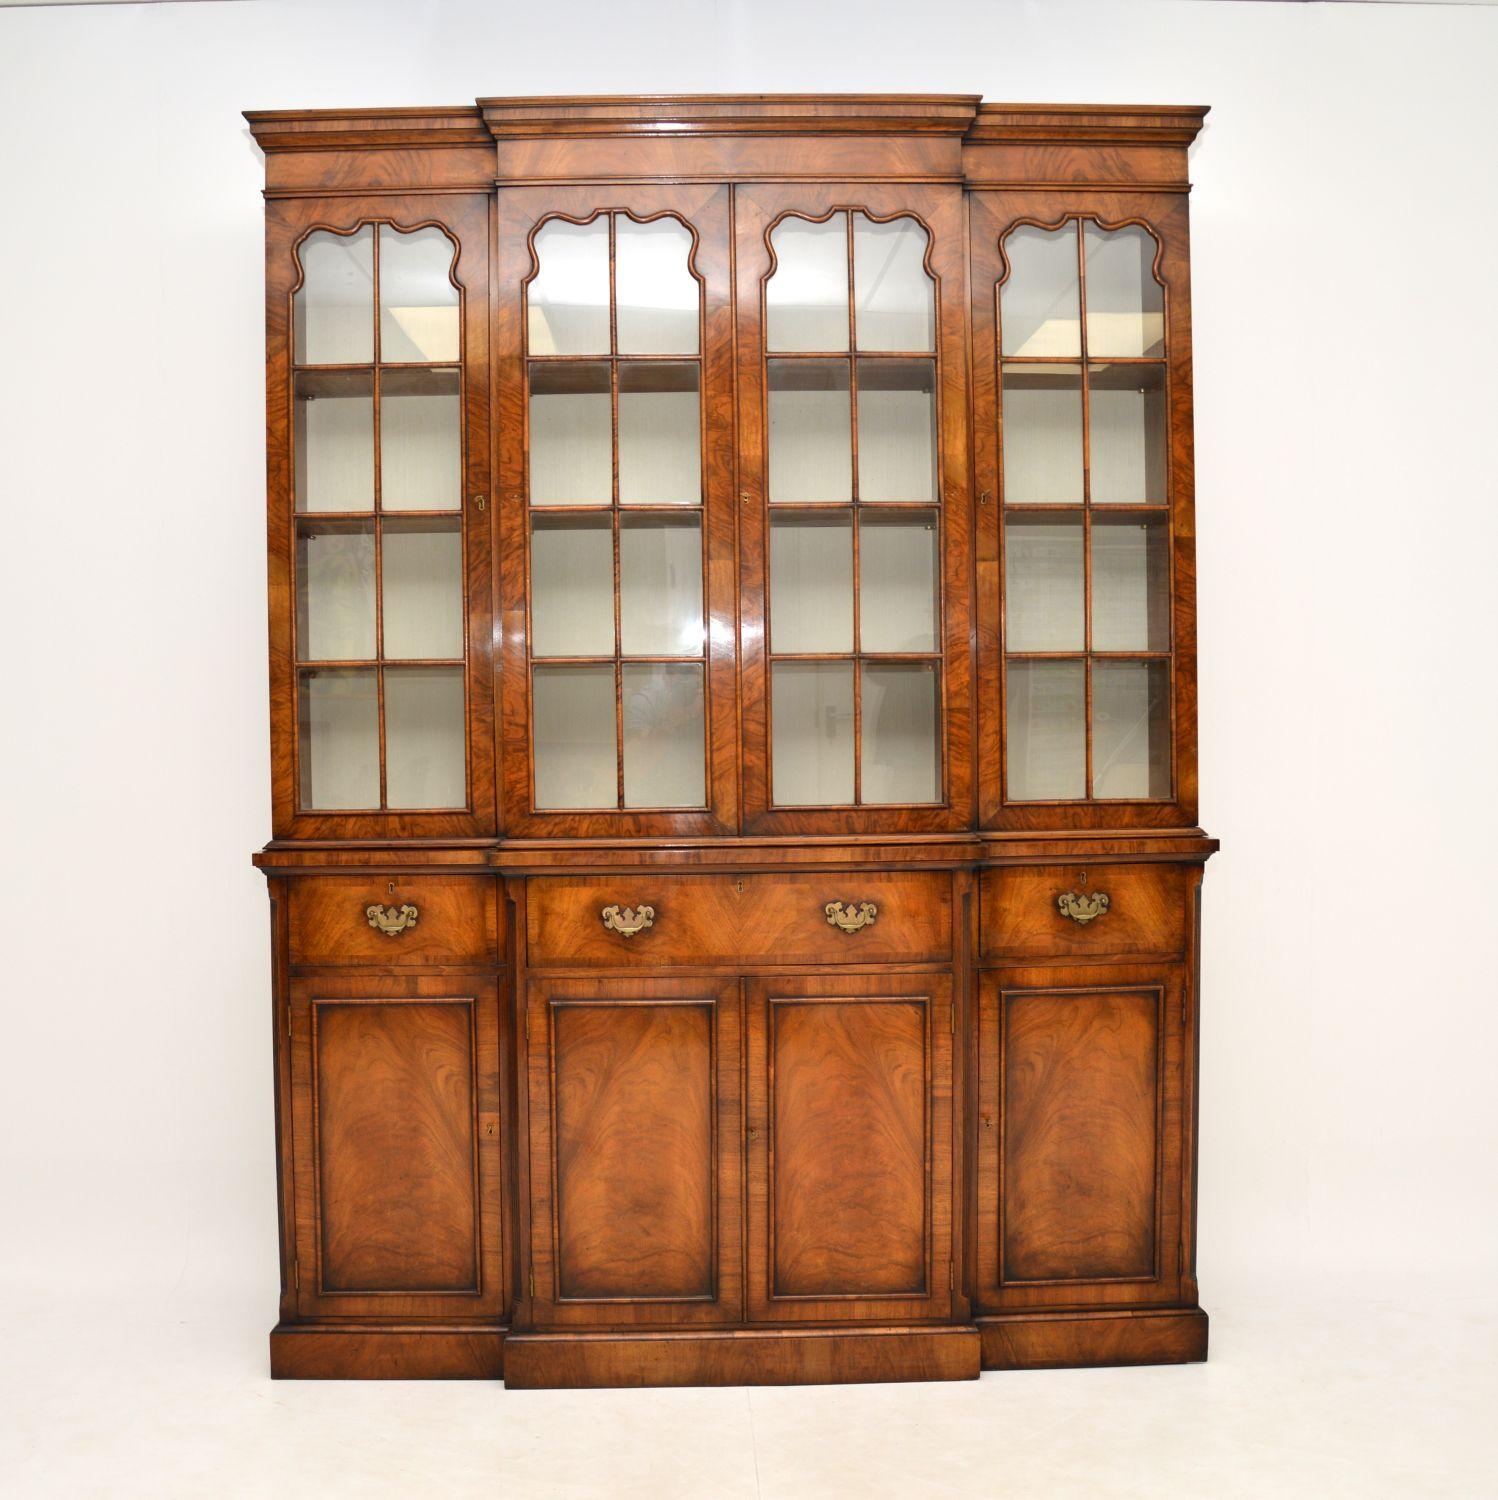 A large and very impressive walnut breakfront bookcase, in the antique Georgian style. This dates from around the 1950-60’s period.

It is of amazing quality, it is extremely well built and heavy. It is all solid wood construction, with stunning